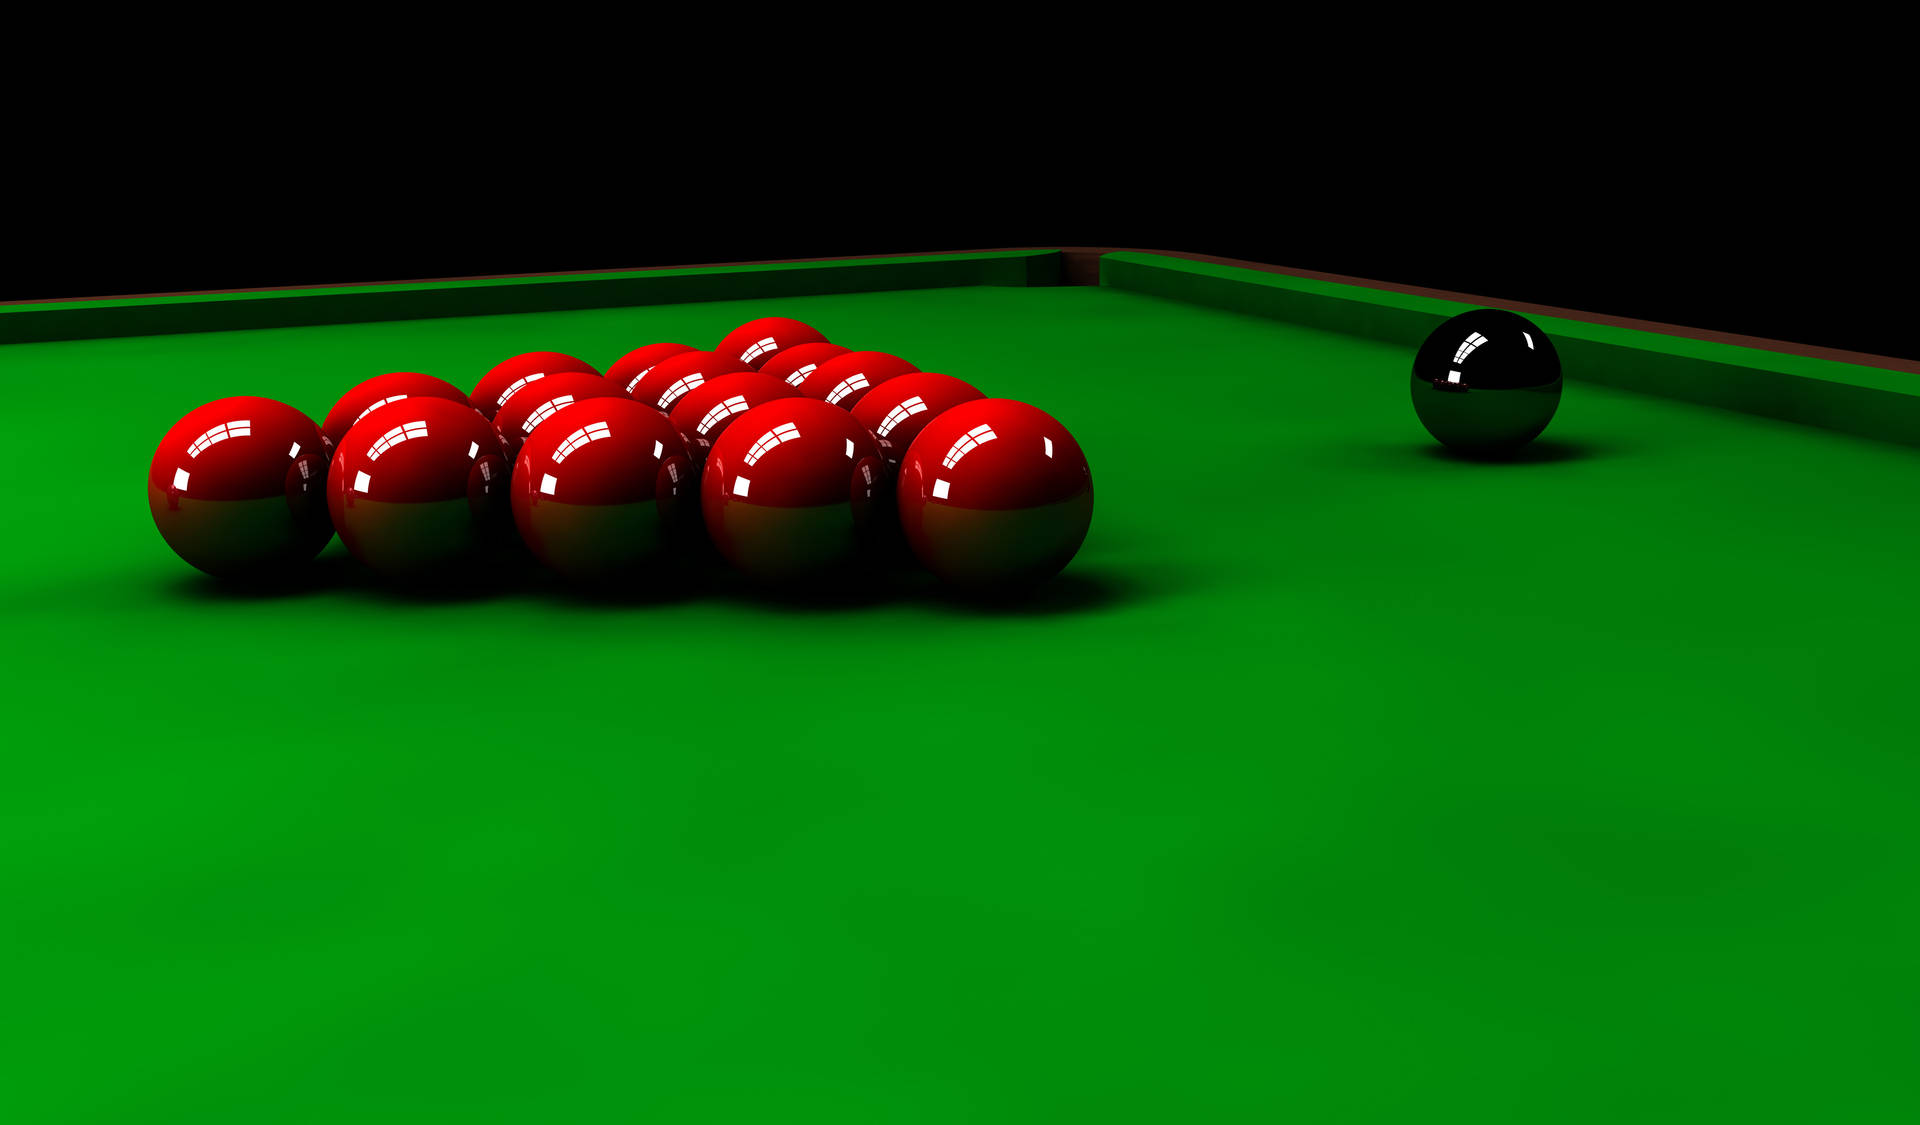 Lustrous Red Snooker Balls Background